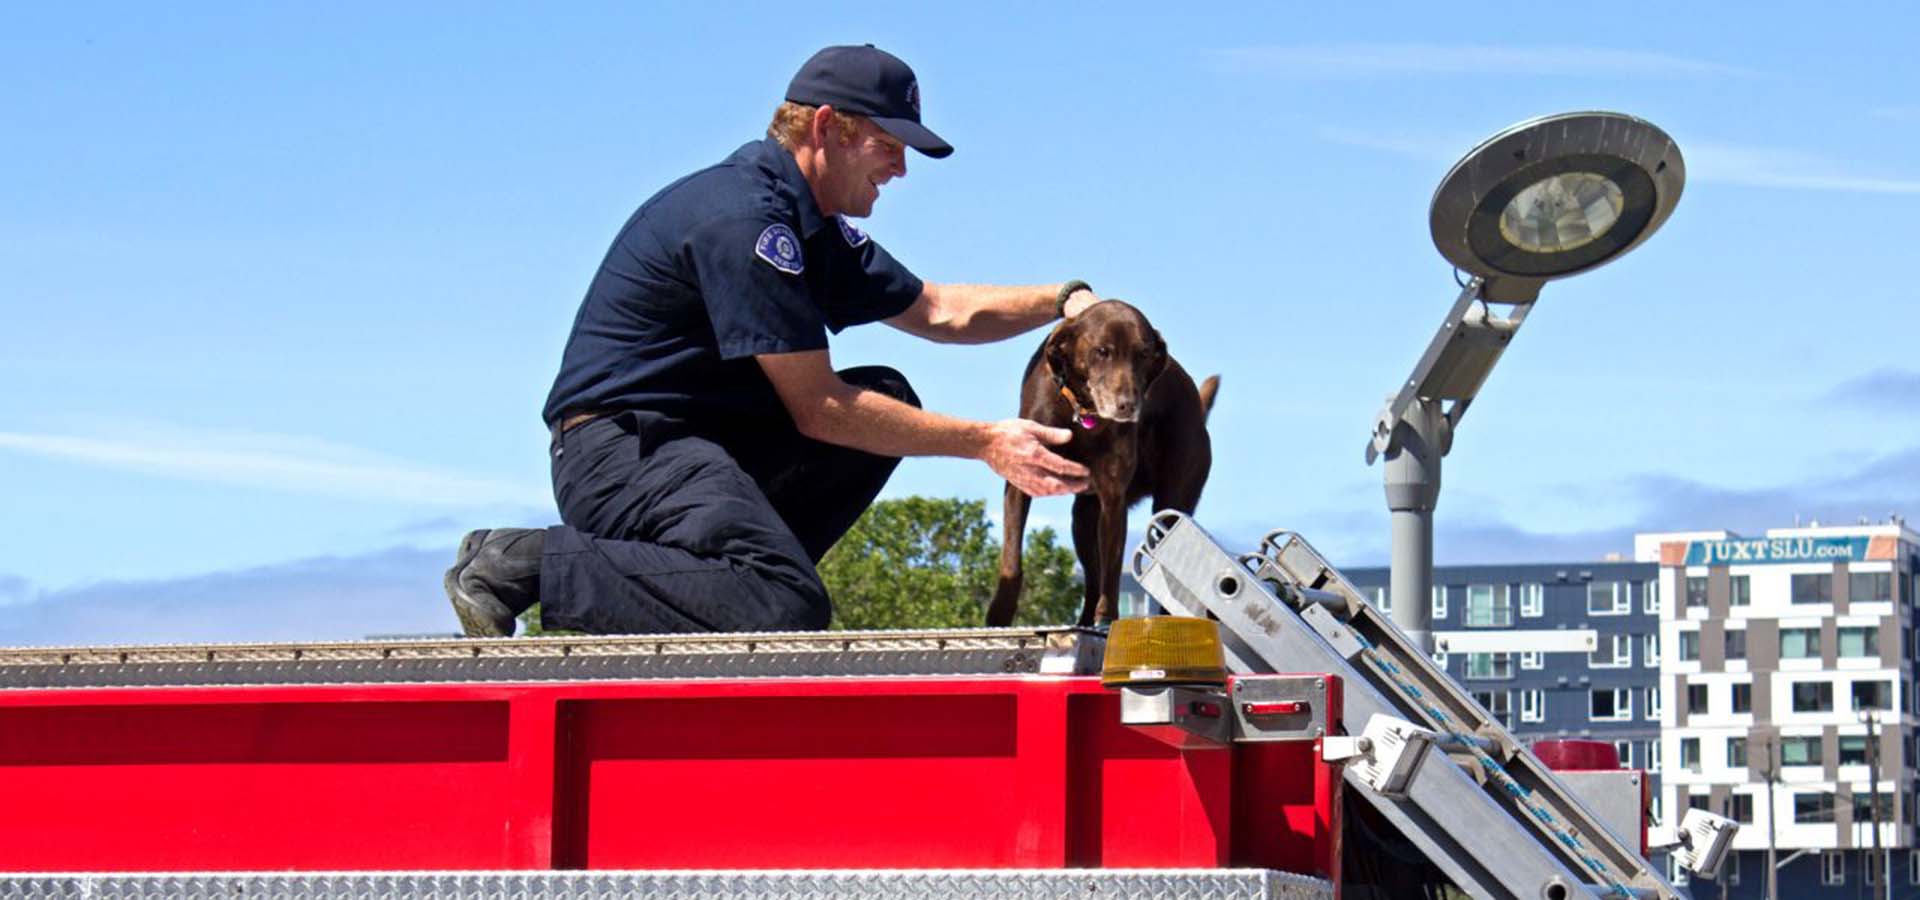 Fireman and dog on a firetruck roof